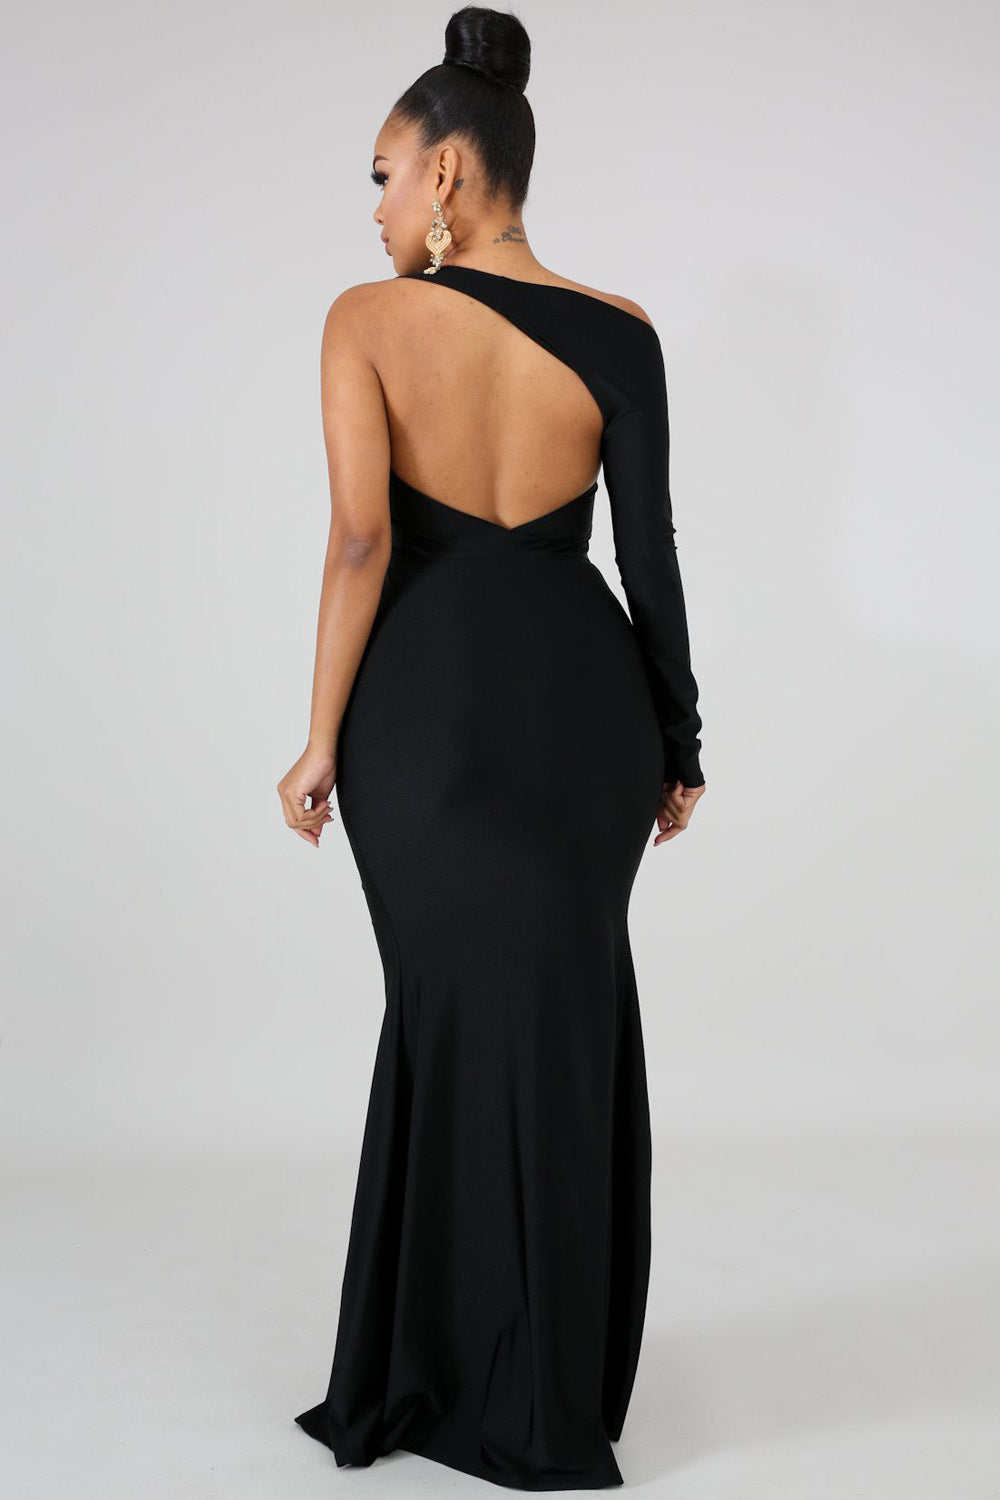 goPals full length black dress with single long sleeve, open back and thigh high slit. 